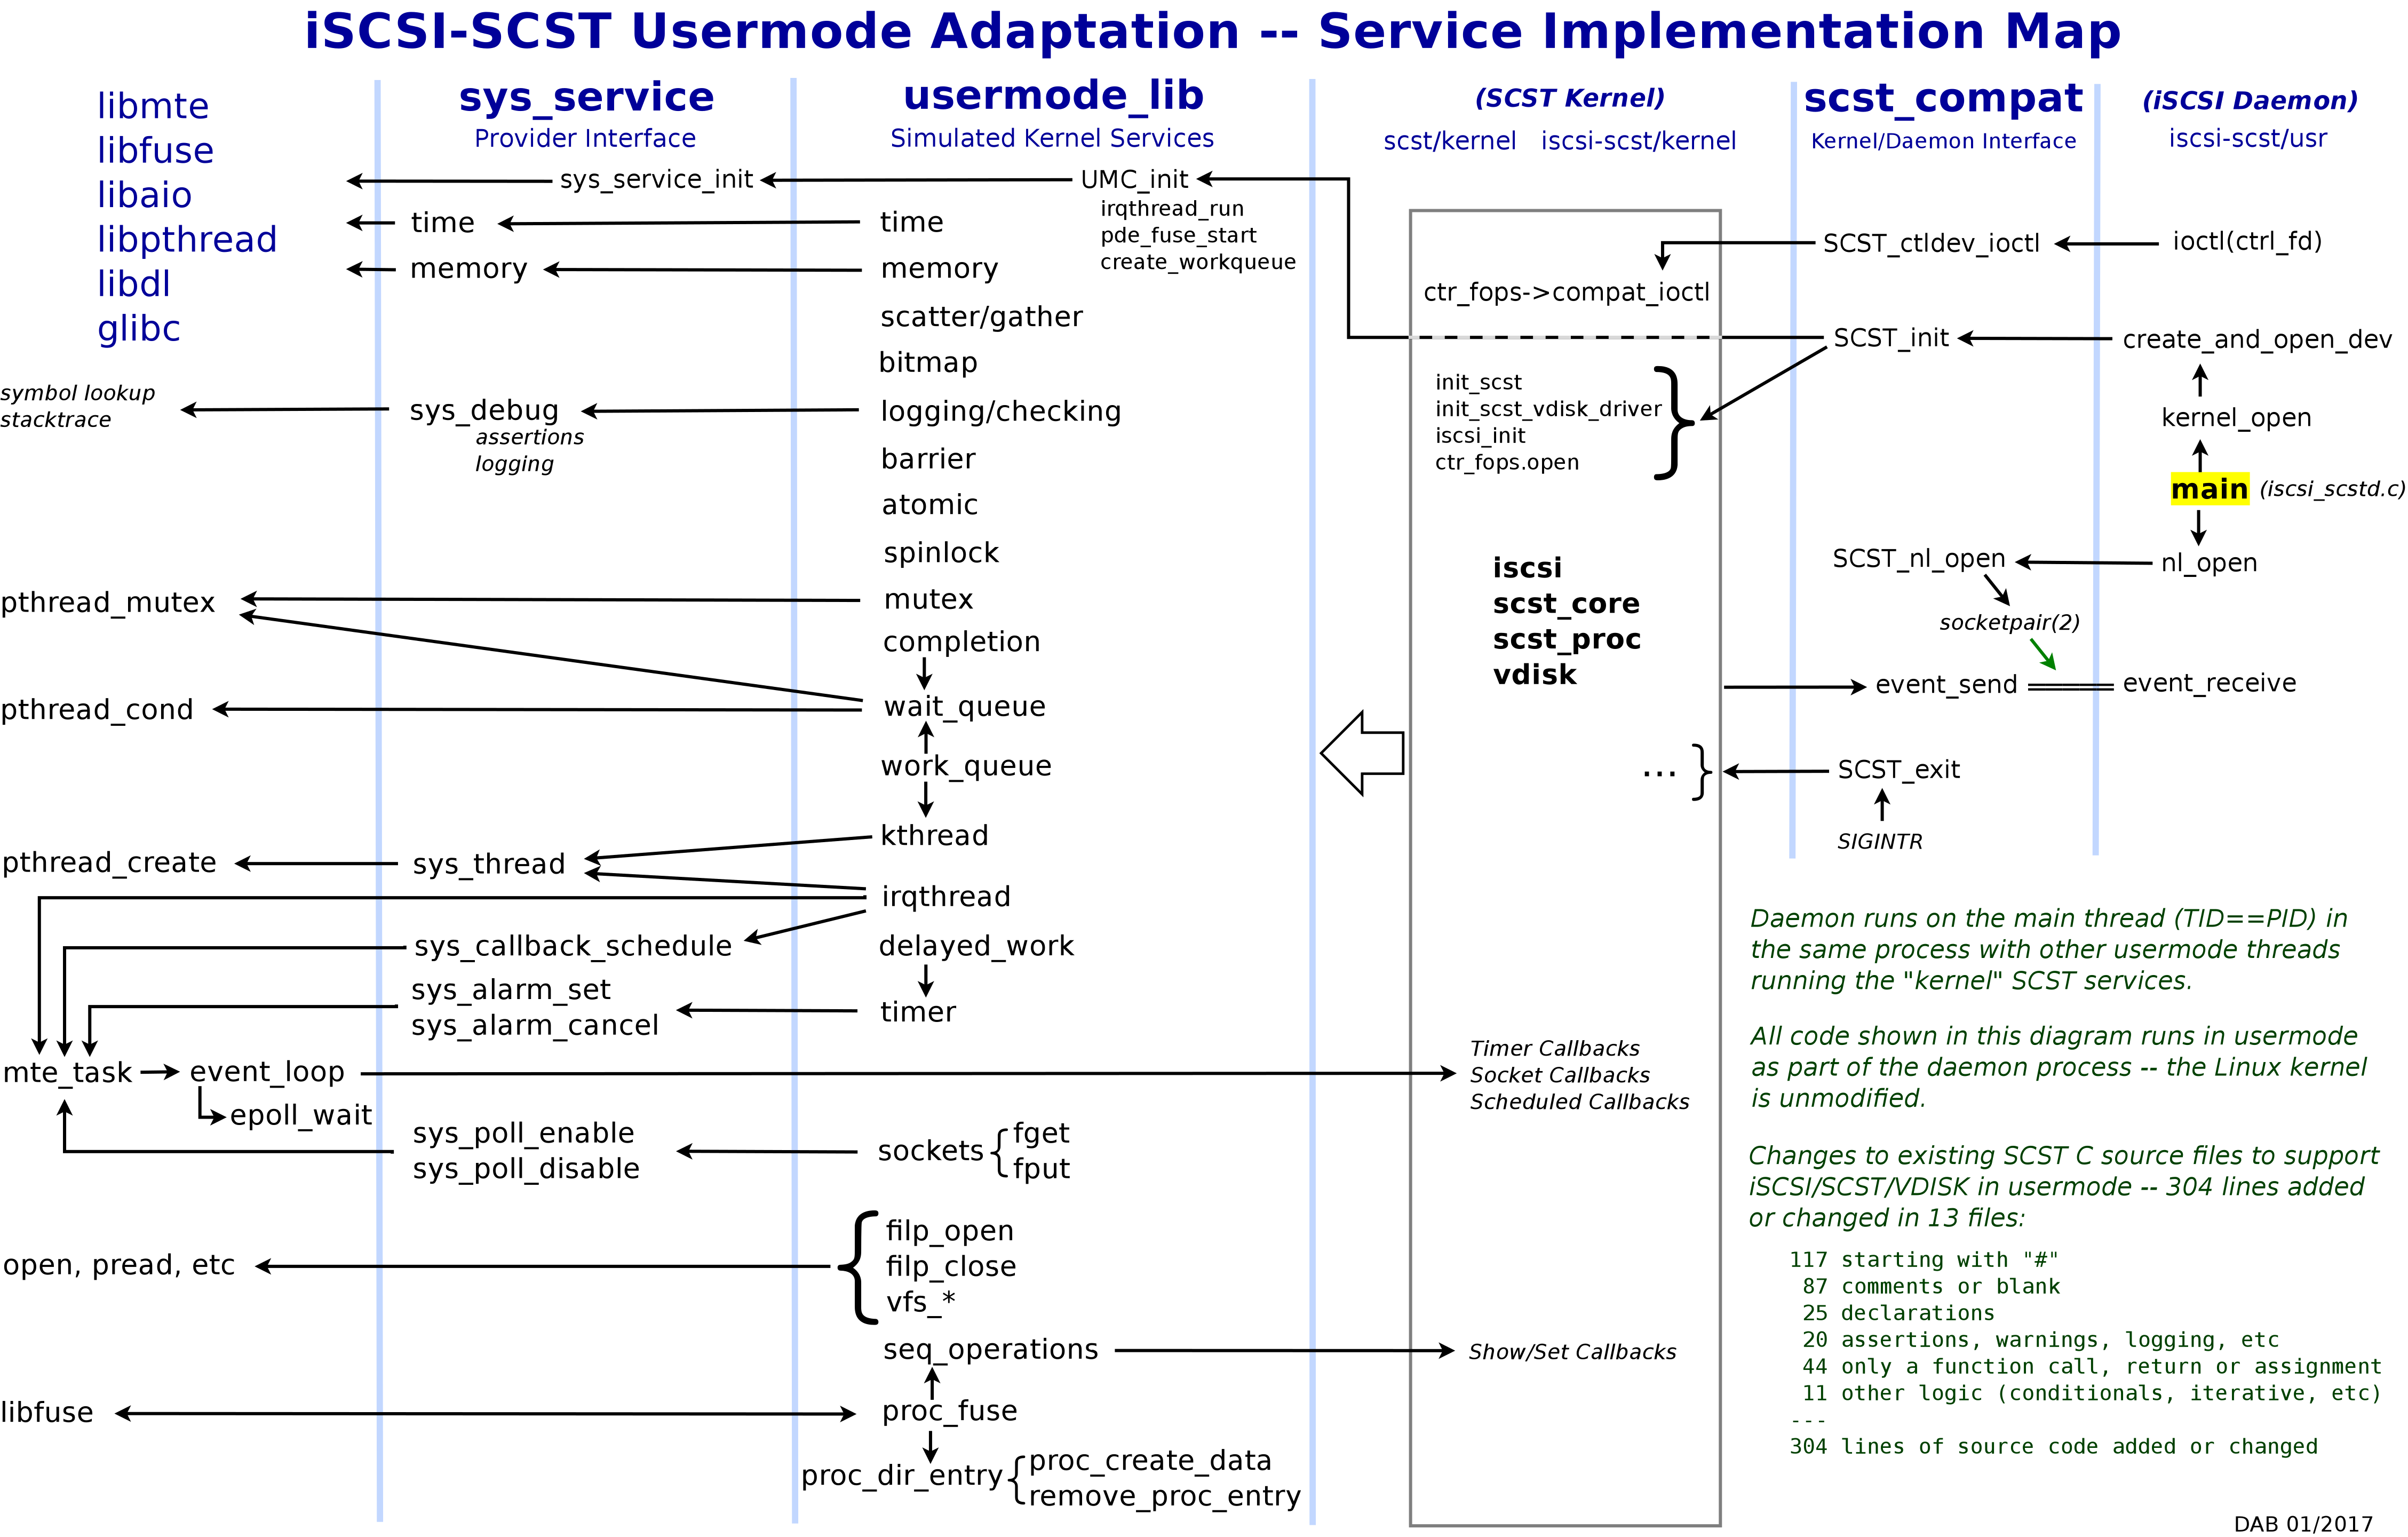 SCST usermode service map